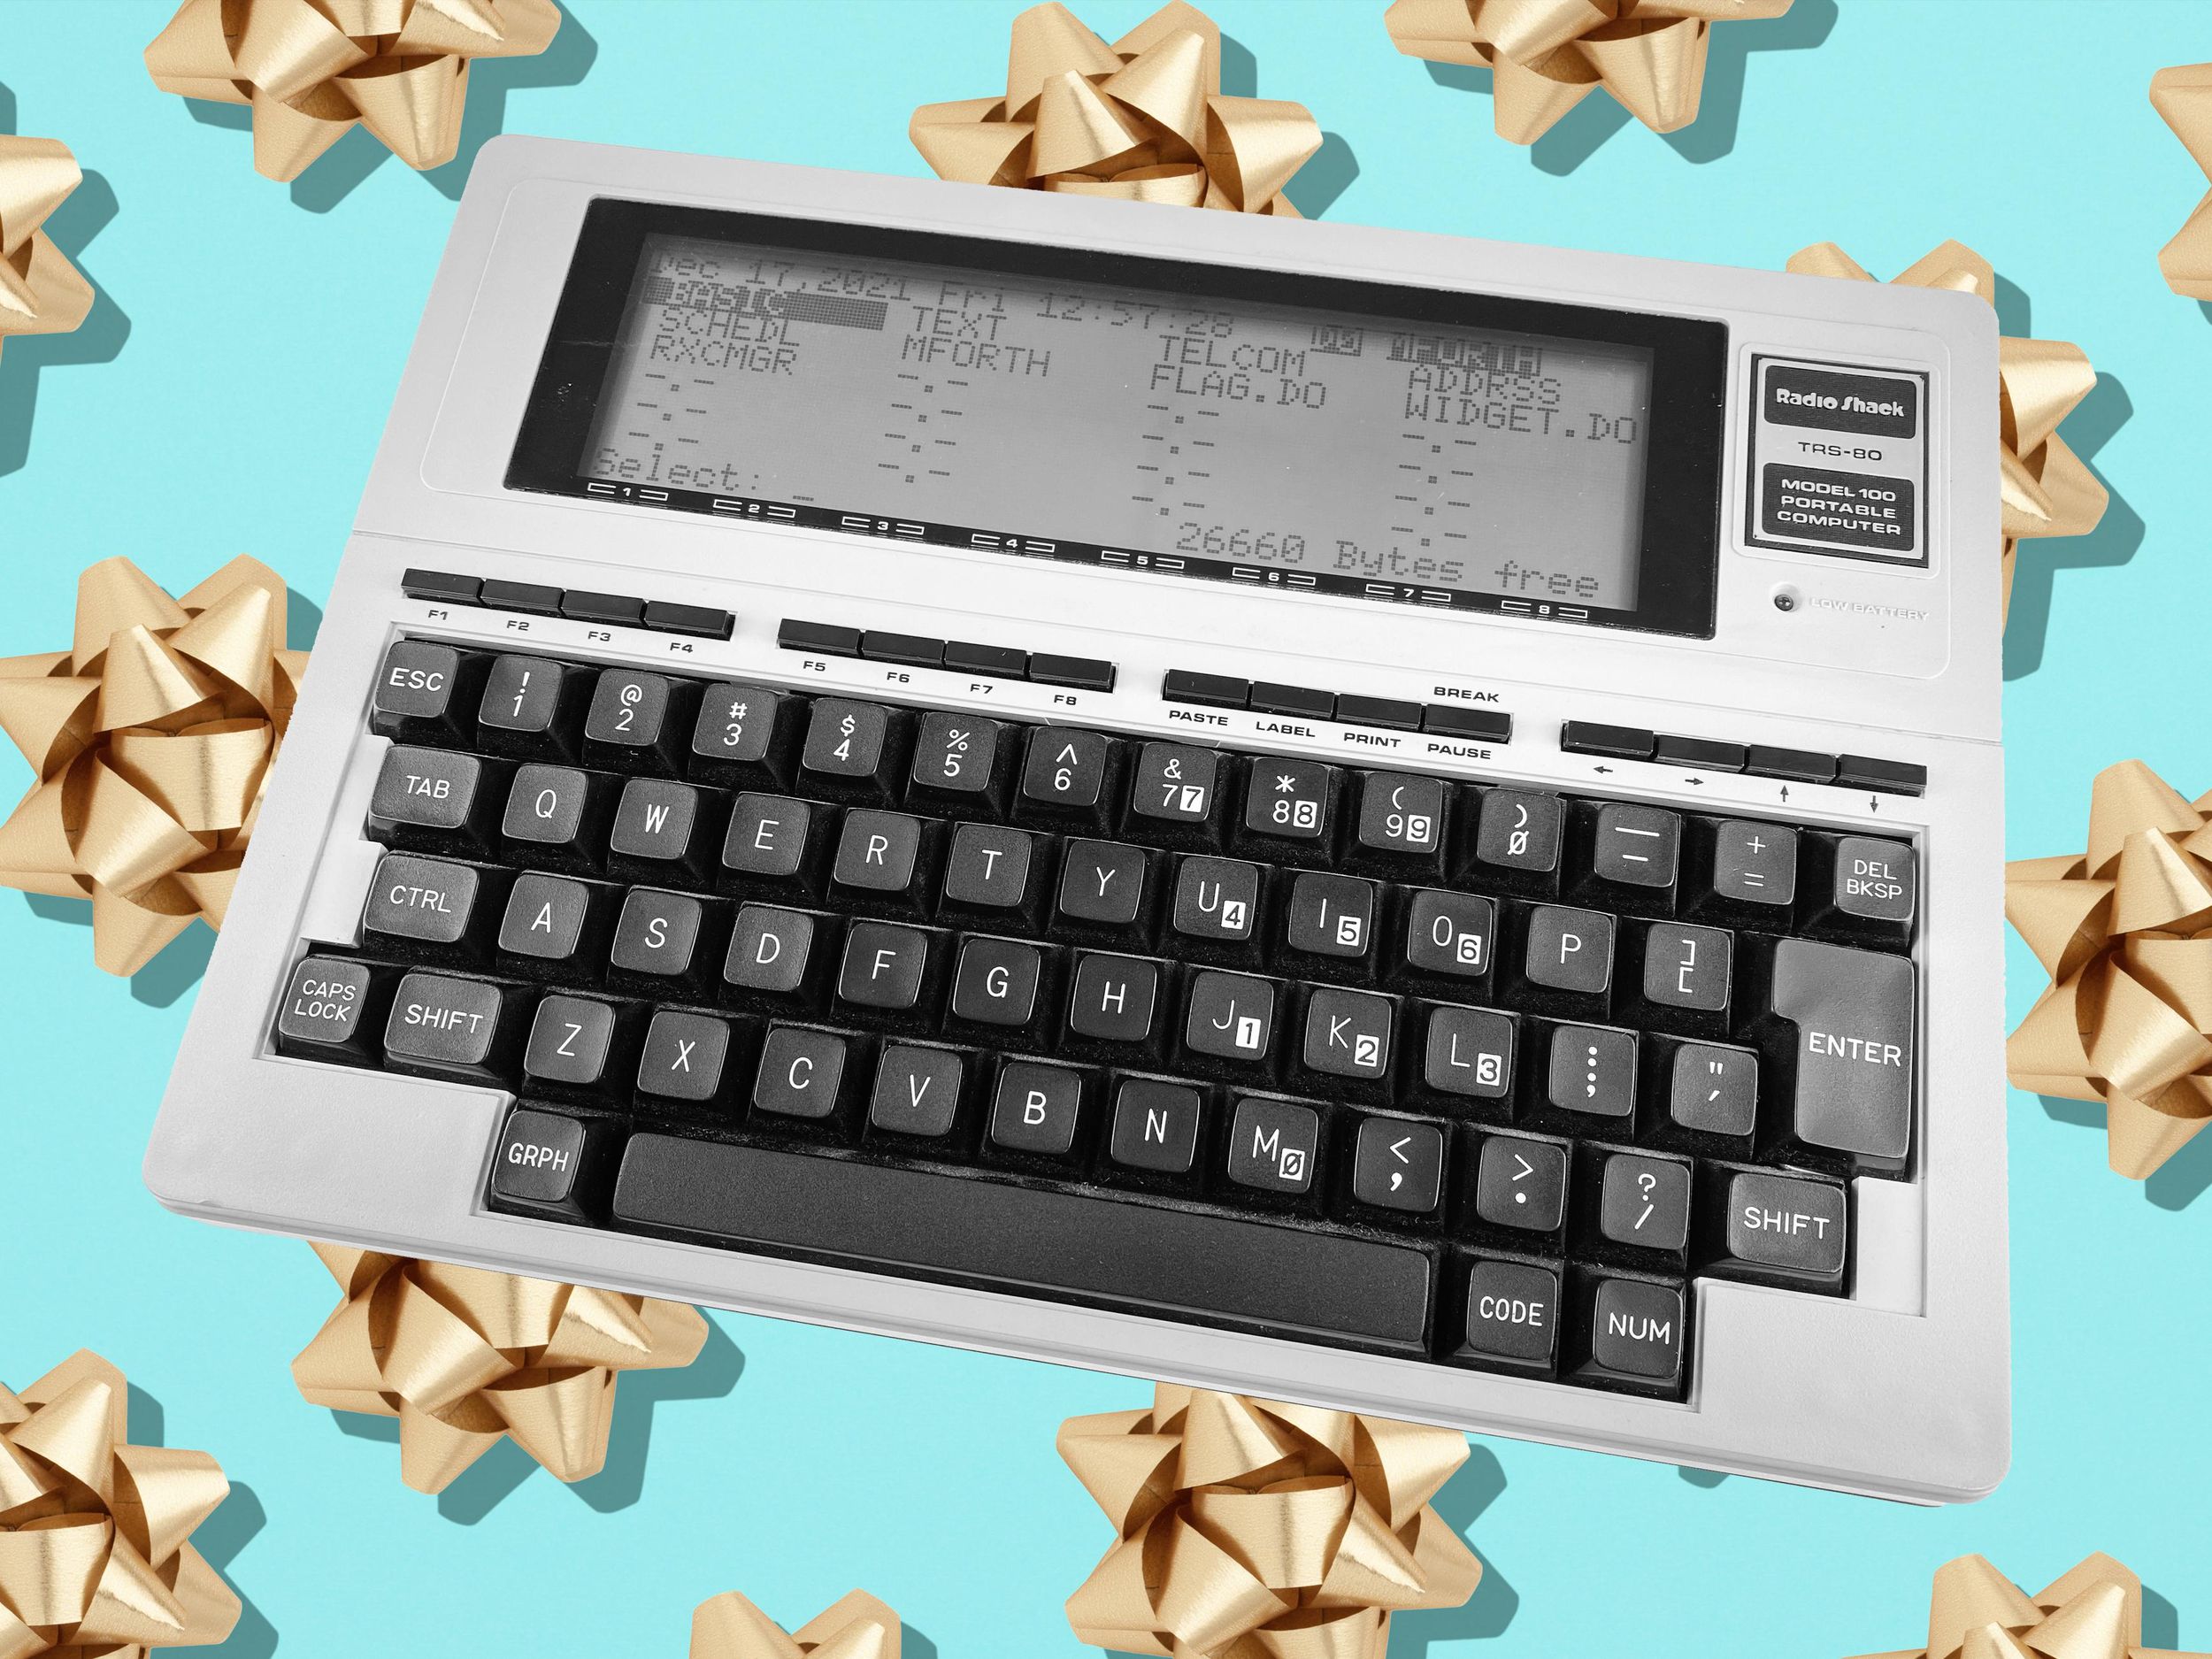 A black and white book-sized computer with a keyboard and monochrome LCD screen on top of a colorful background with bows